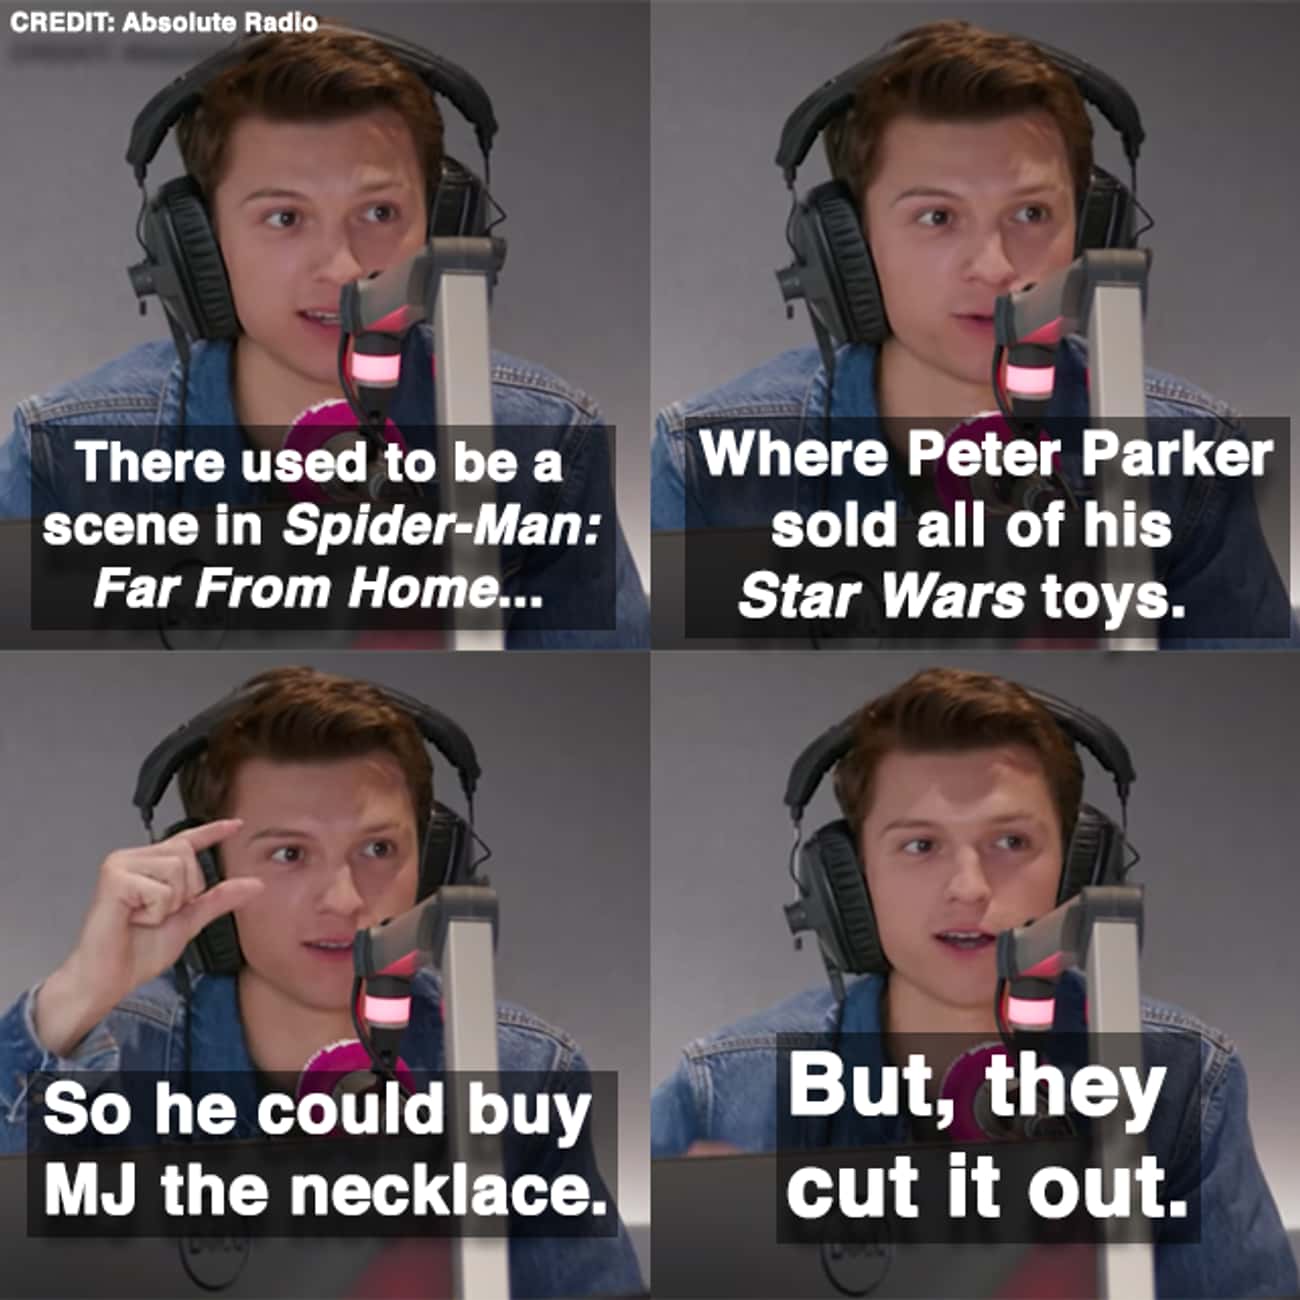 Tom Revealed A Deleted Scene Of Peter Parker Selling His 'Star Wars' Toys For MJ